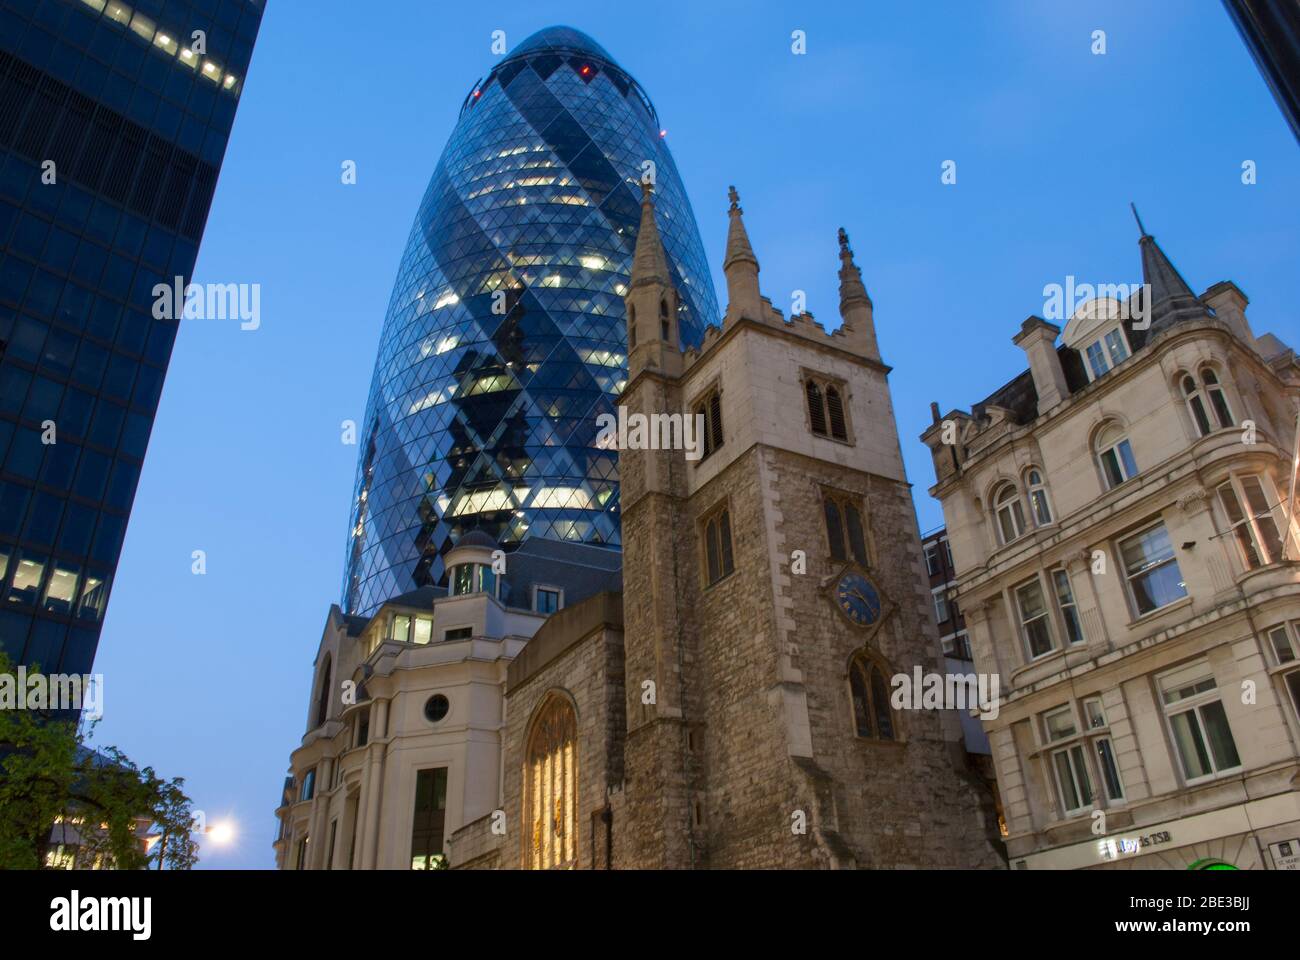 Blue Tower Gherkin Building 30 St Mary Axe, London EC3A 8BF by Foster & Partners Stock Photo